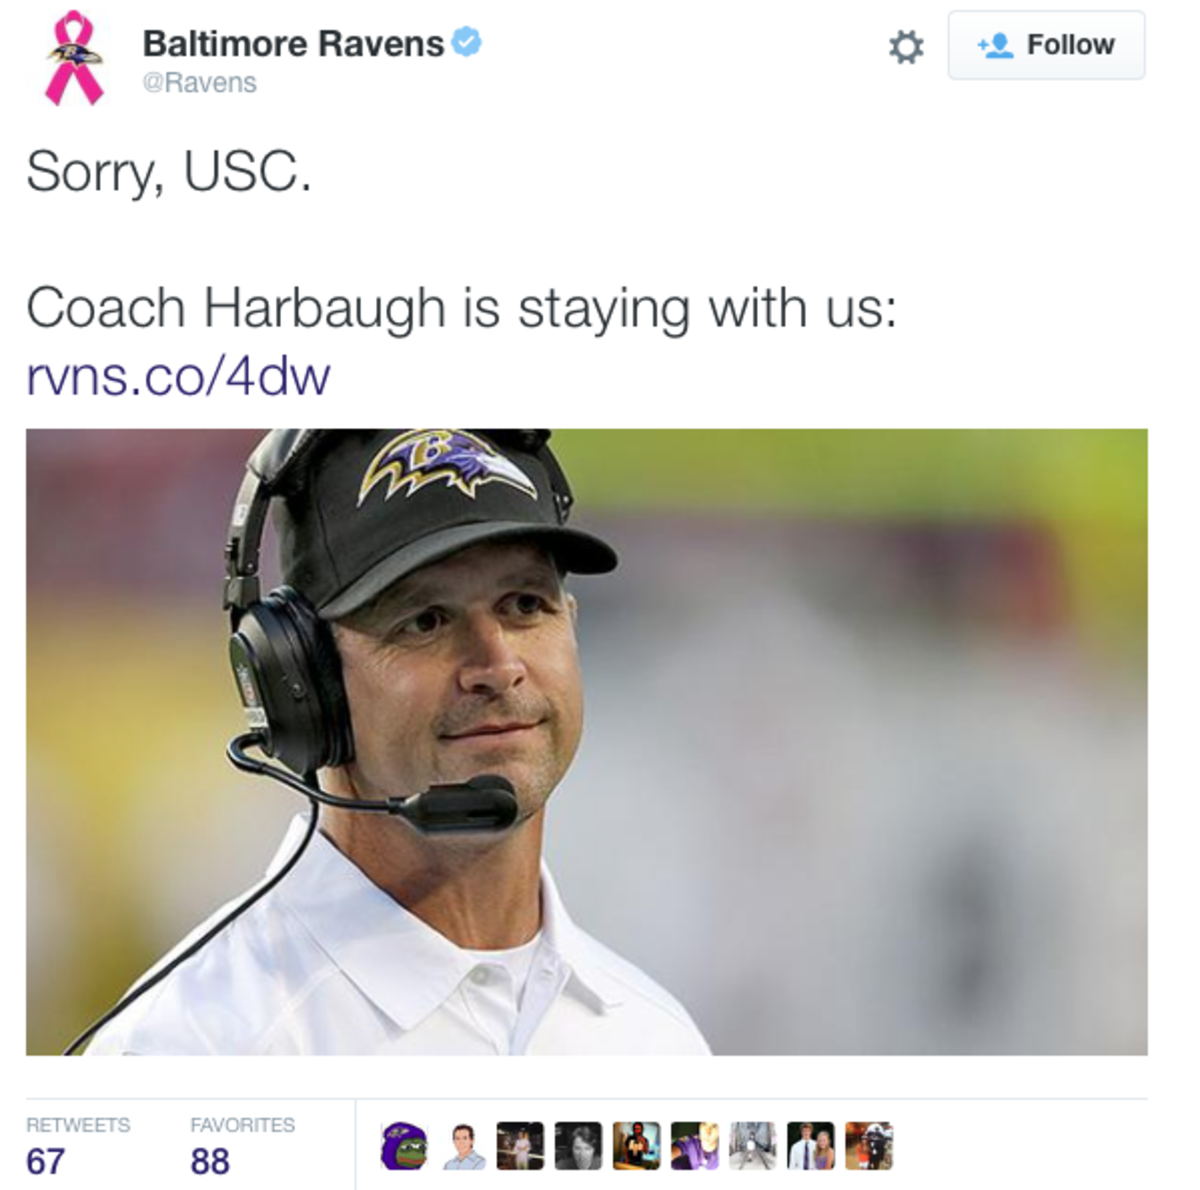 Baltimore Ravens apologize to USC for keeping Coach Harbaugh on Twitter.